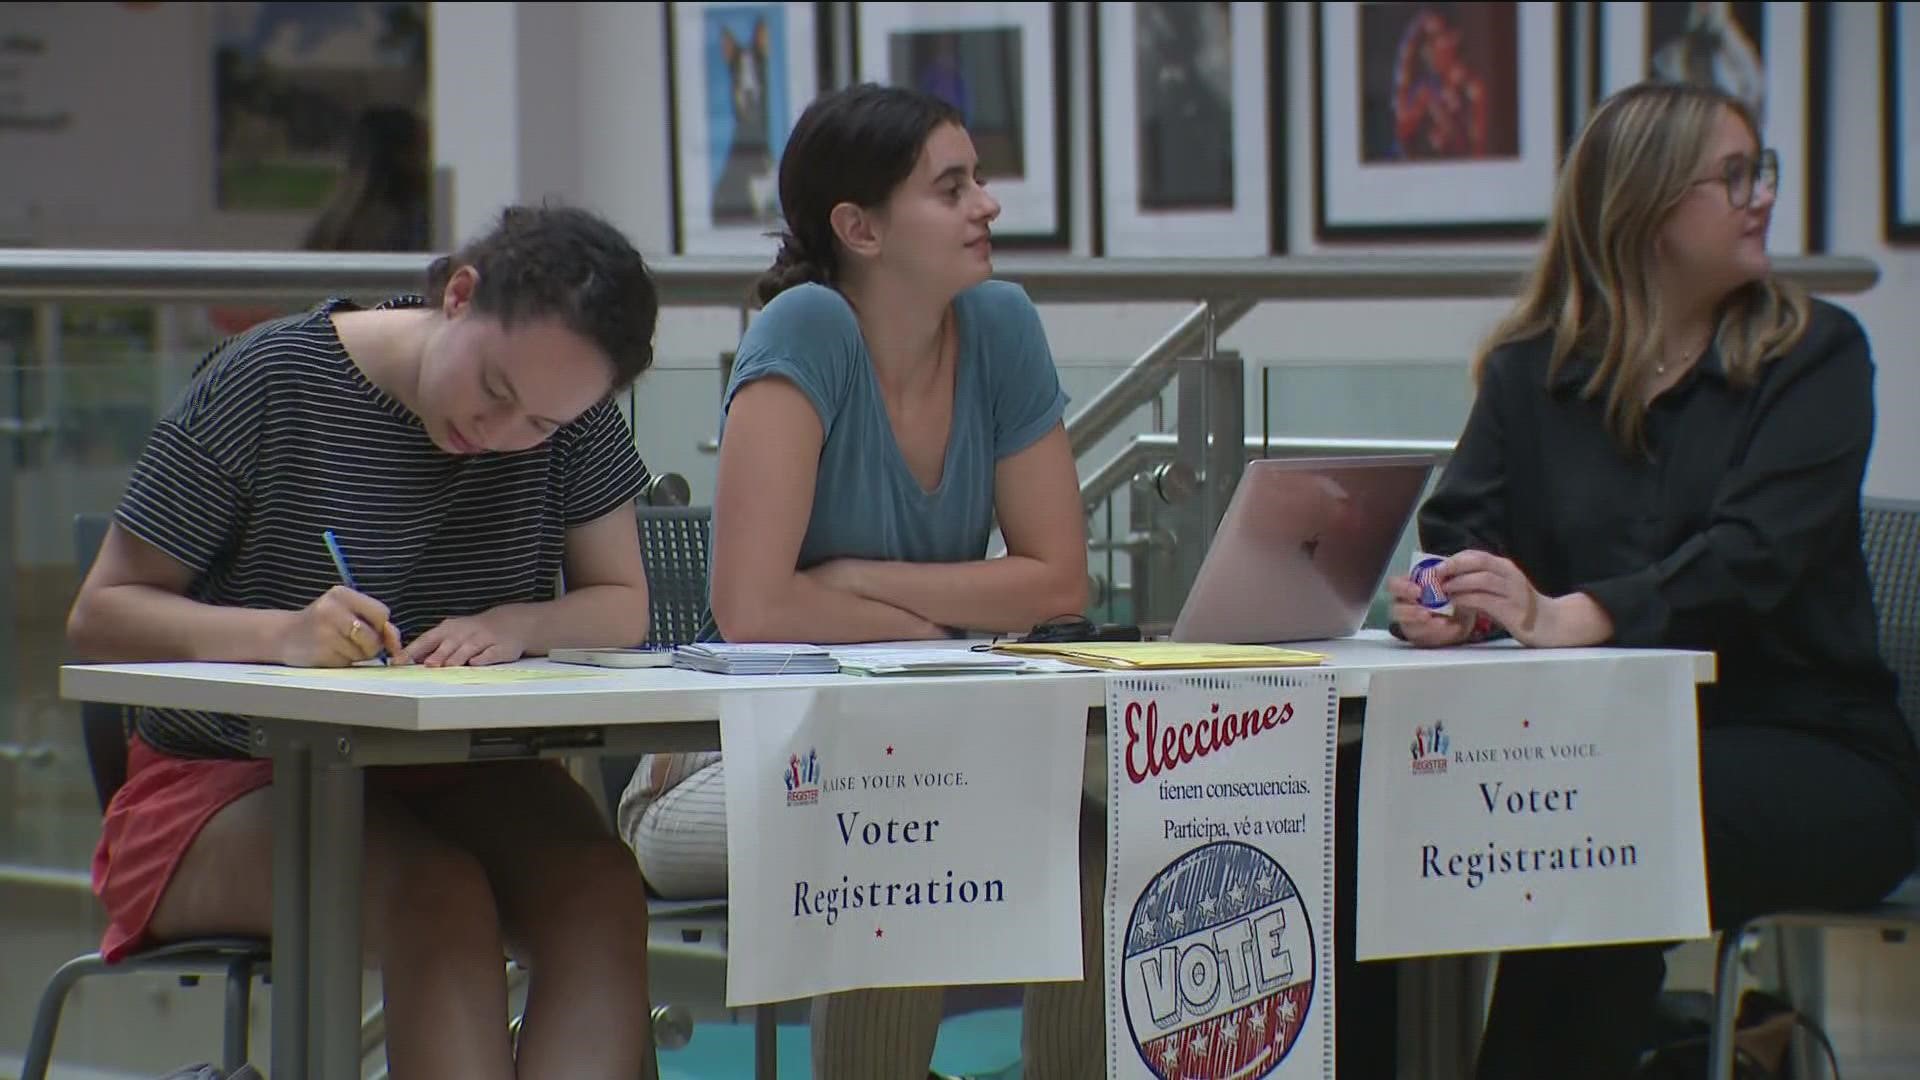 Just 24 hours before the deadline to register to vote in Texas, registration tables dotted college campuses, waiting for more potential voters.